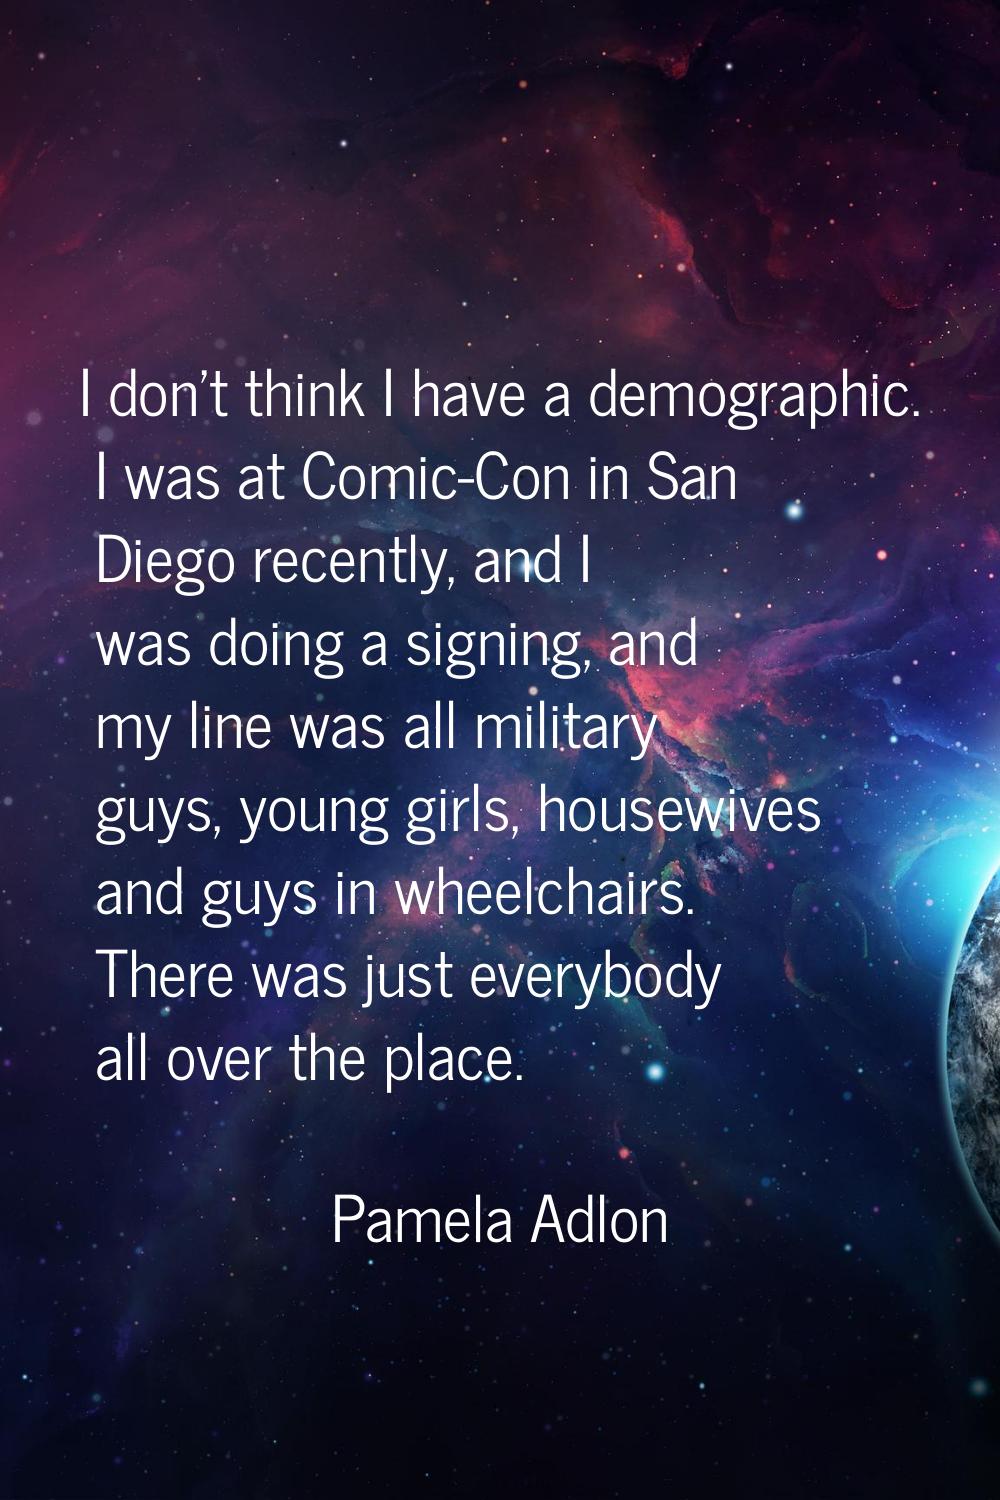 I don't think I have a demographic. I was at Comic-Con in San Diego recently, and I was doing a sig